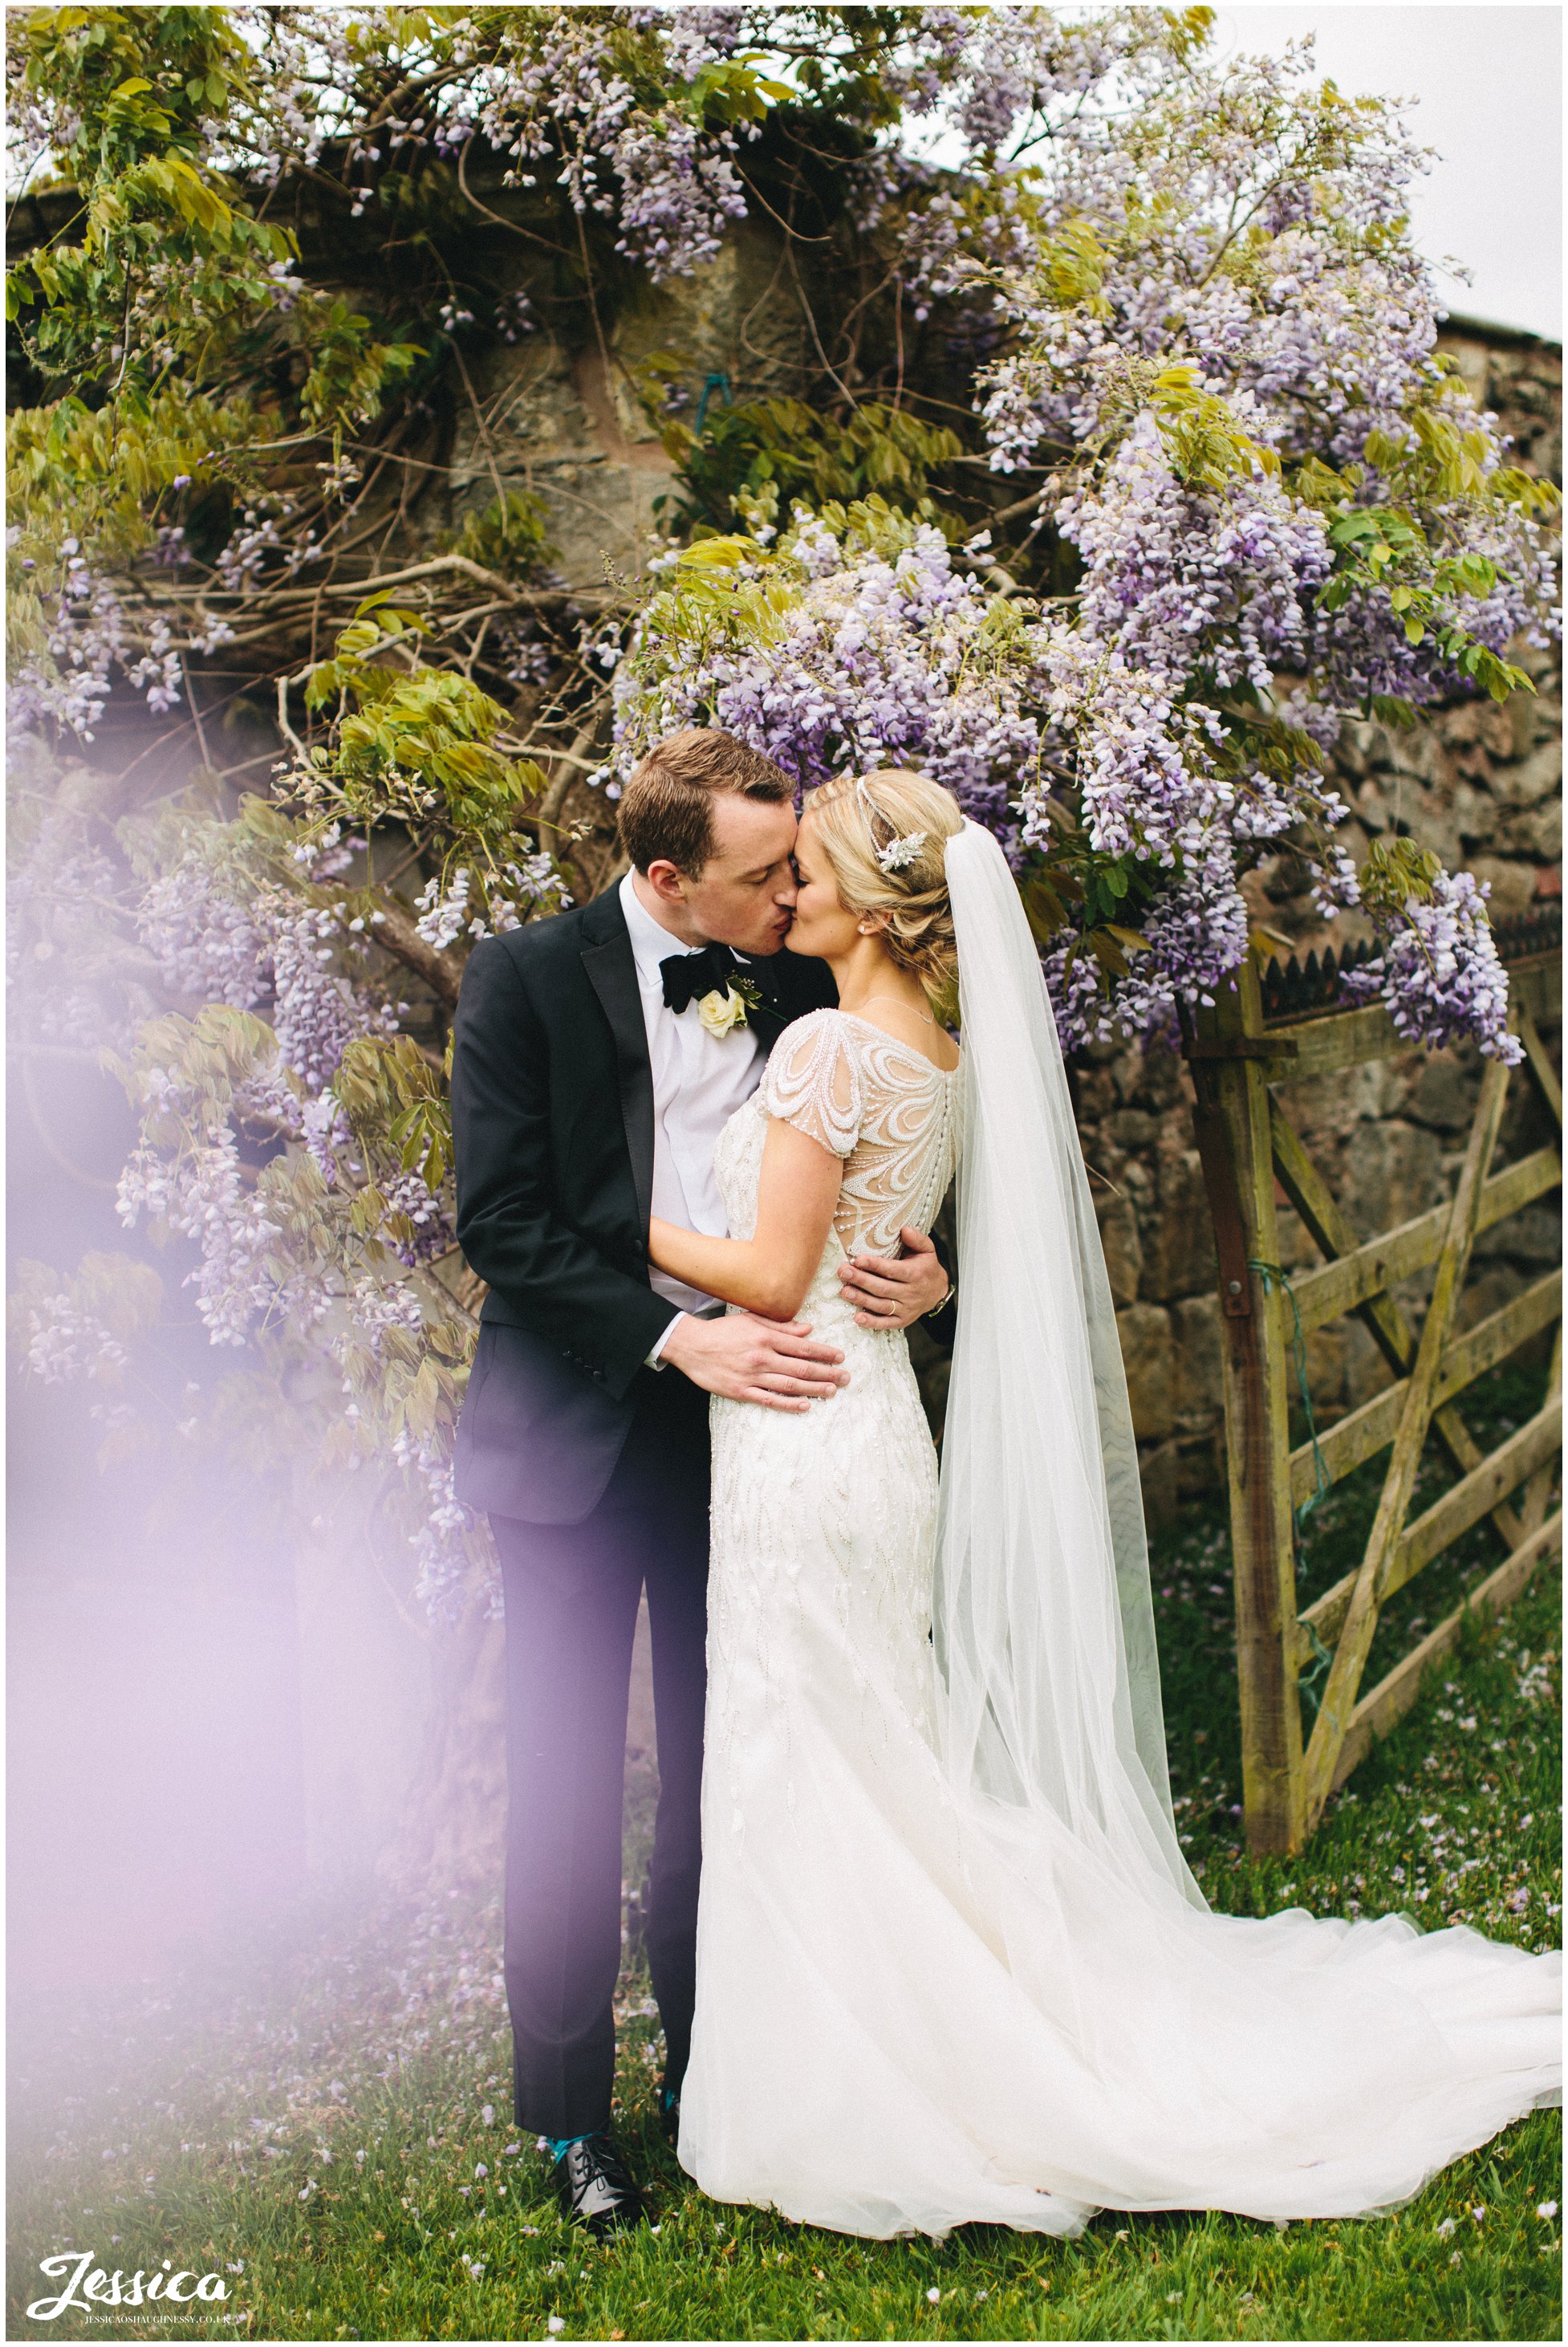 newly wed's surrounded by whisteria on their wedding day at Trevor Hall